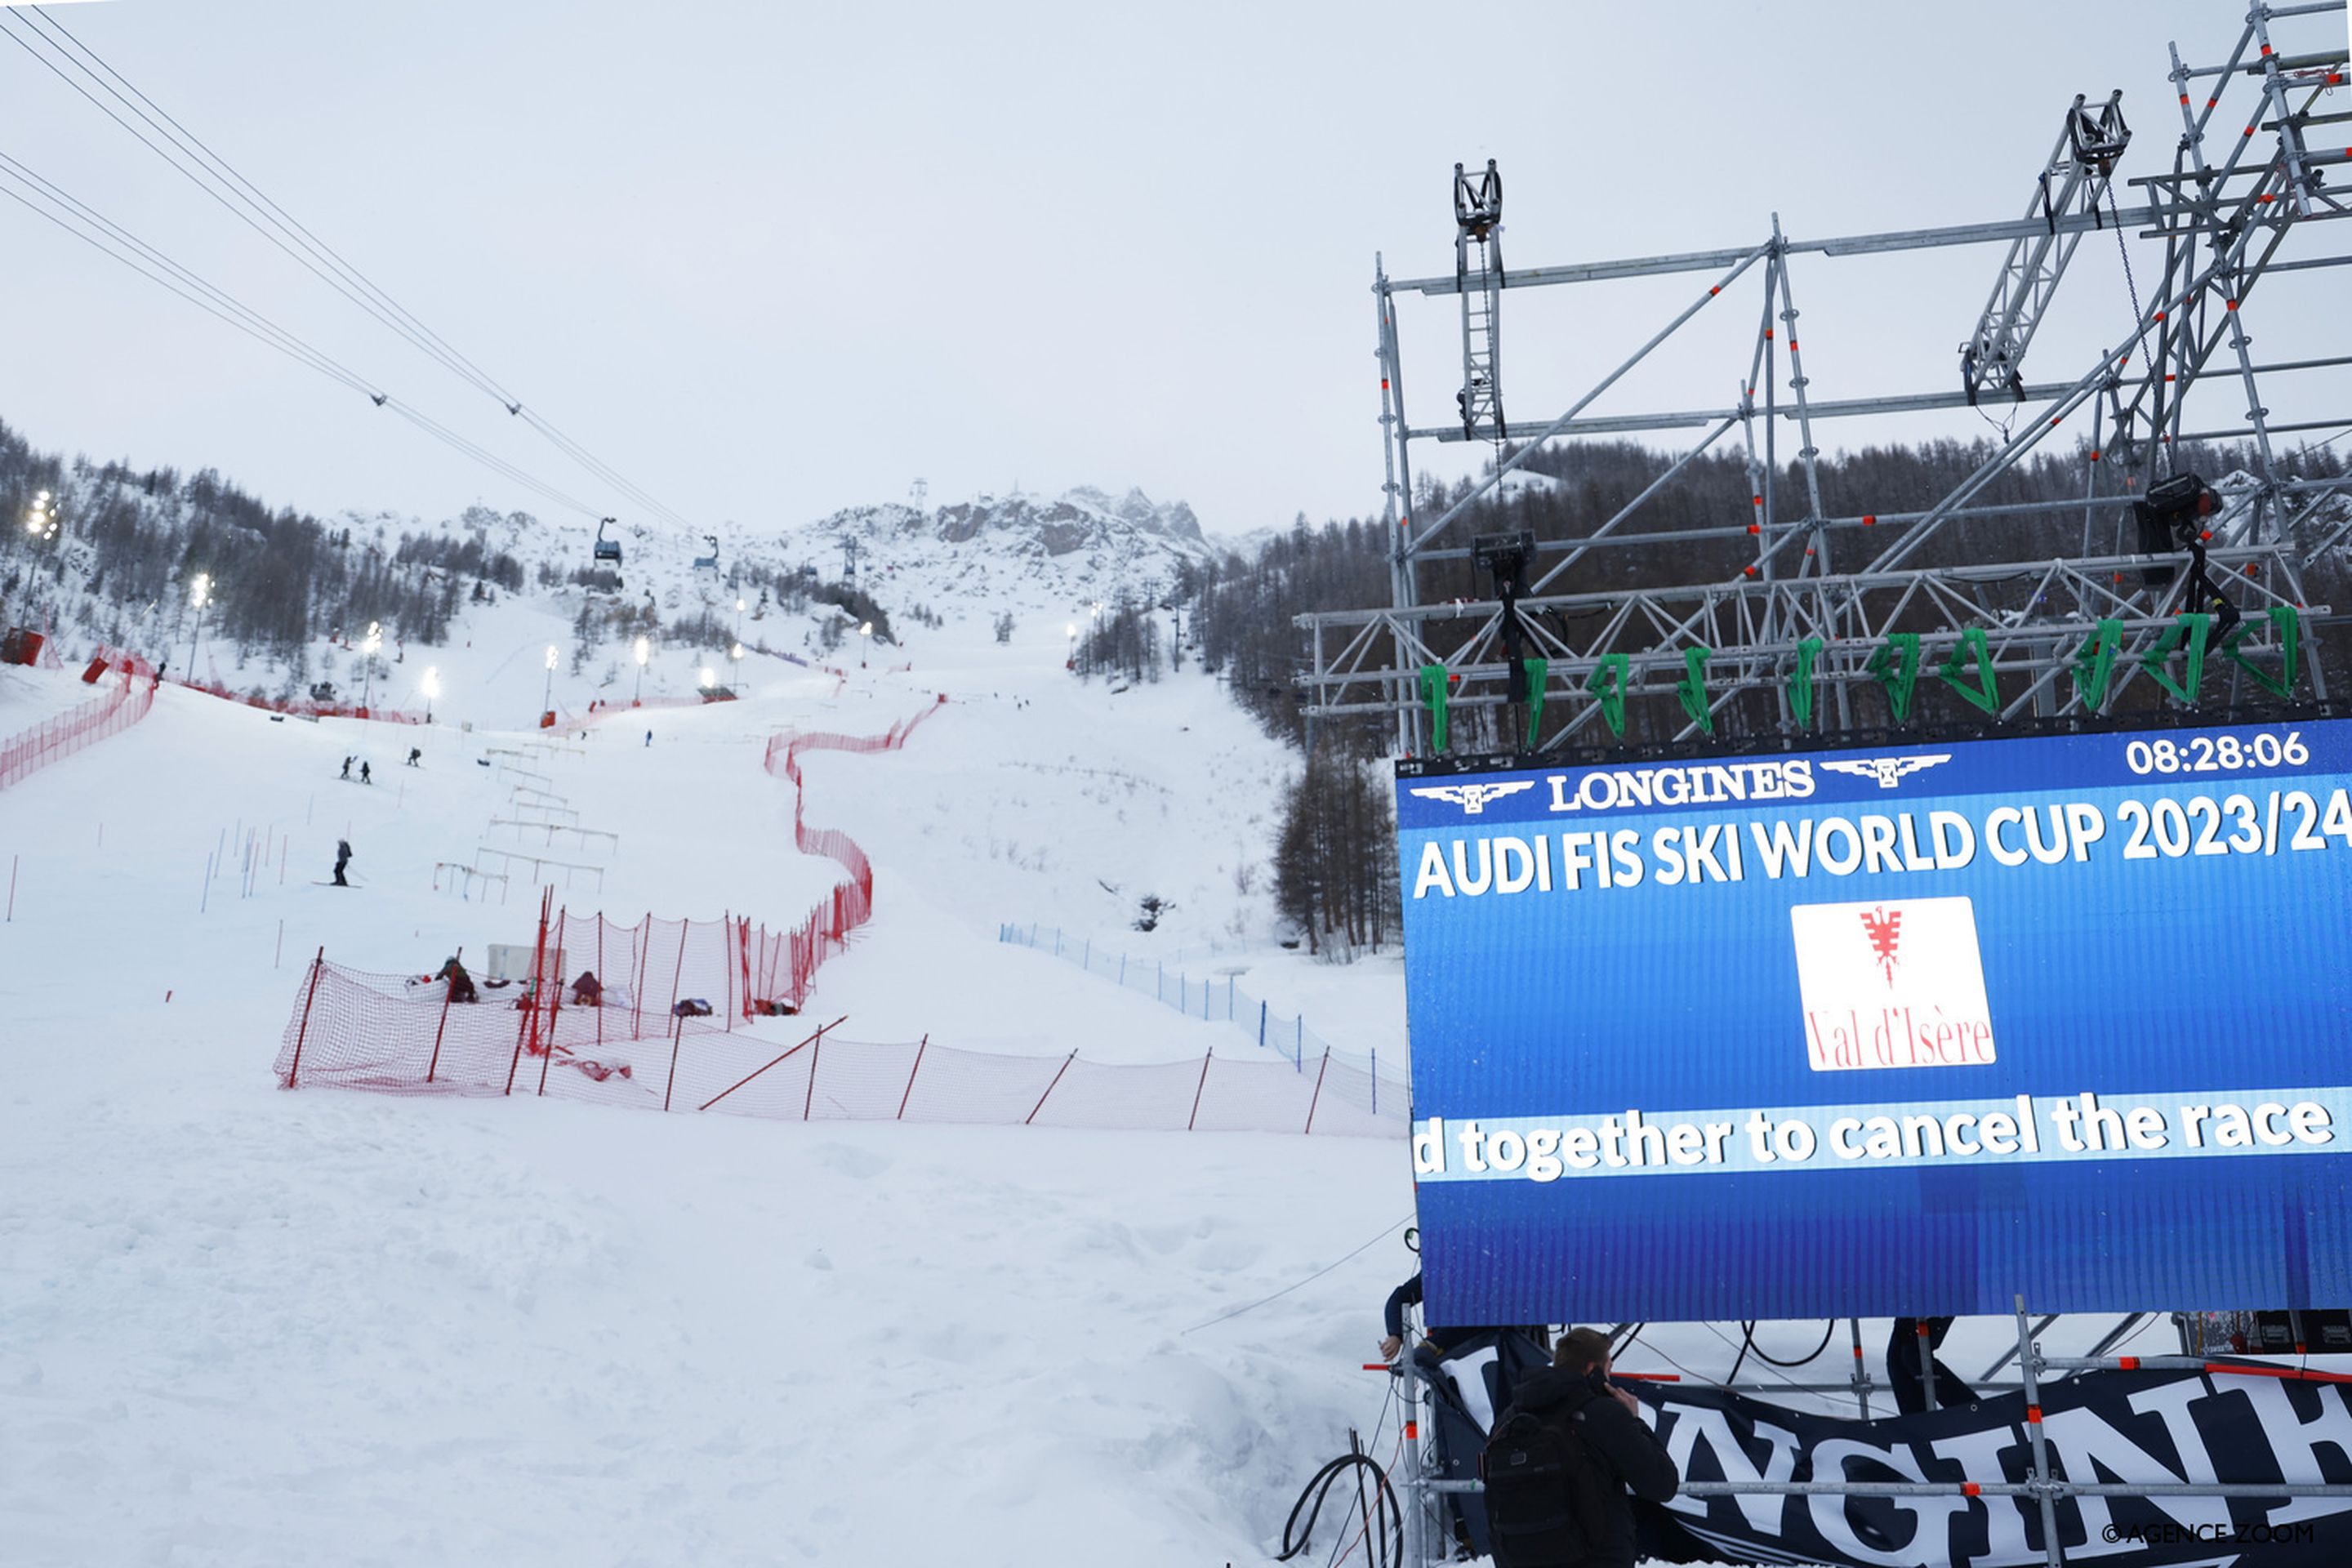 Sunday's conditions in Val d'Isère (FRA) did not allow the men's slalom race to go ahead (Agence Zoom)